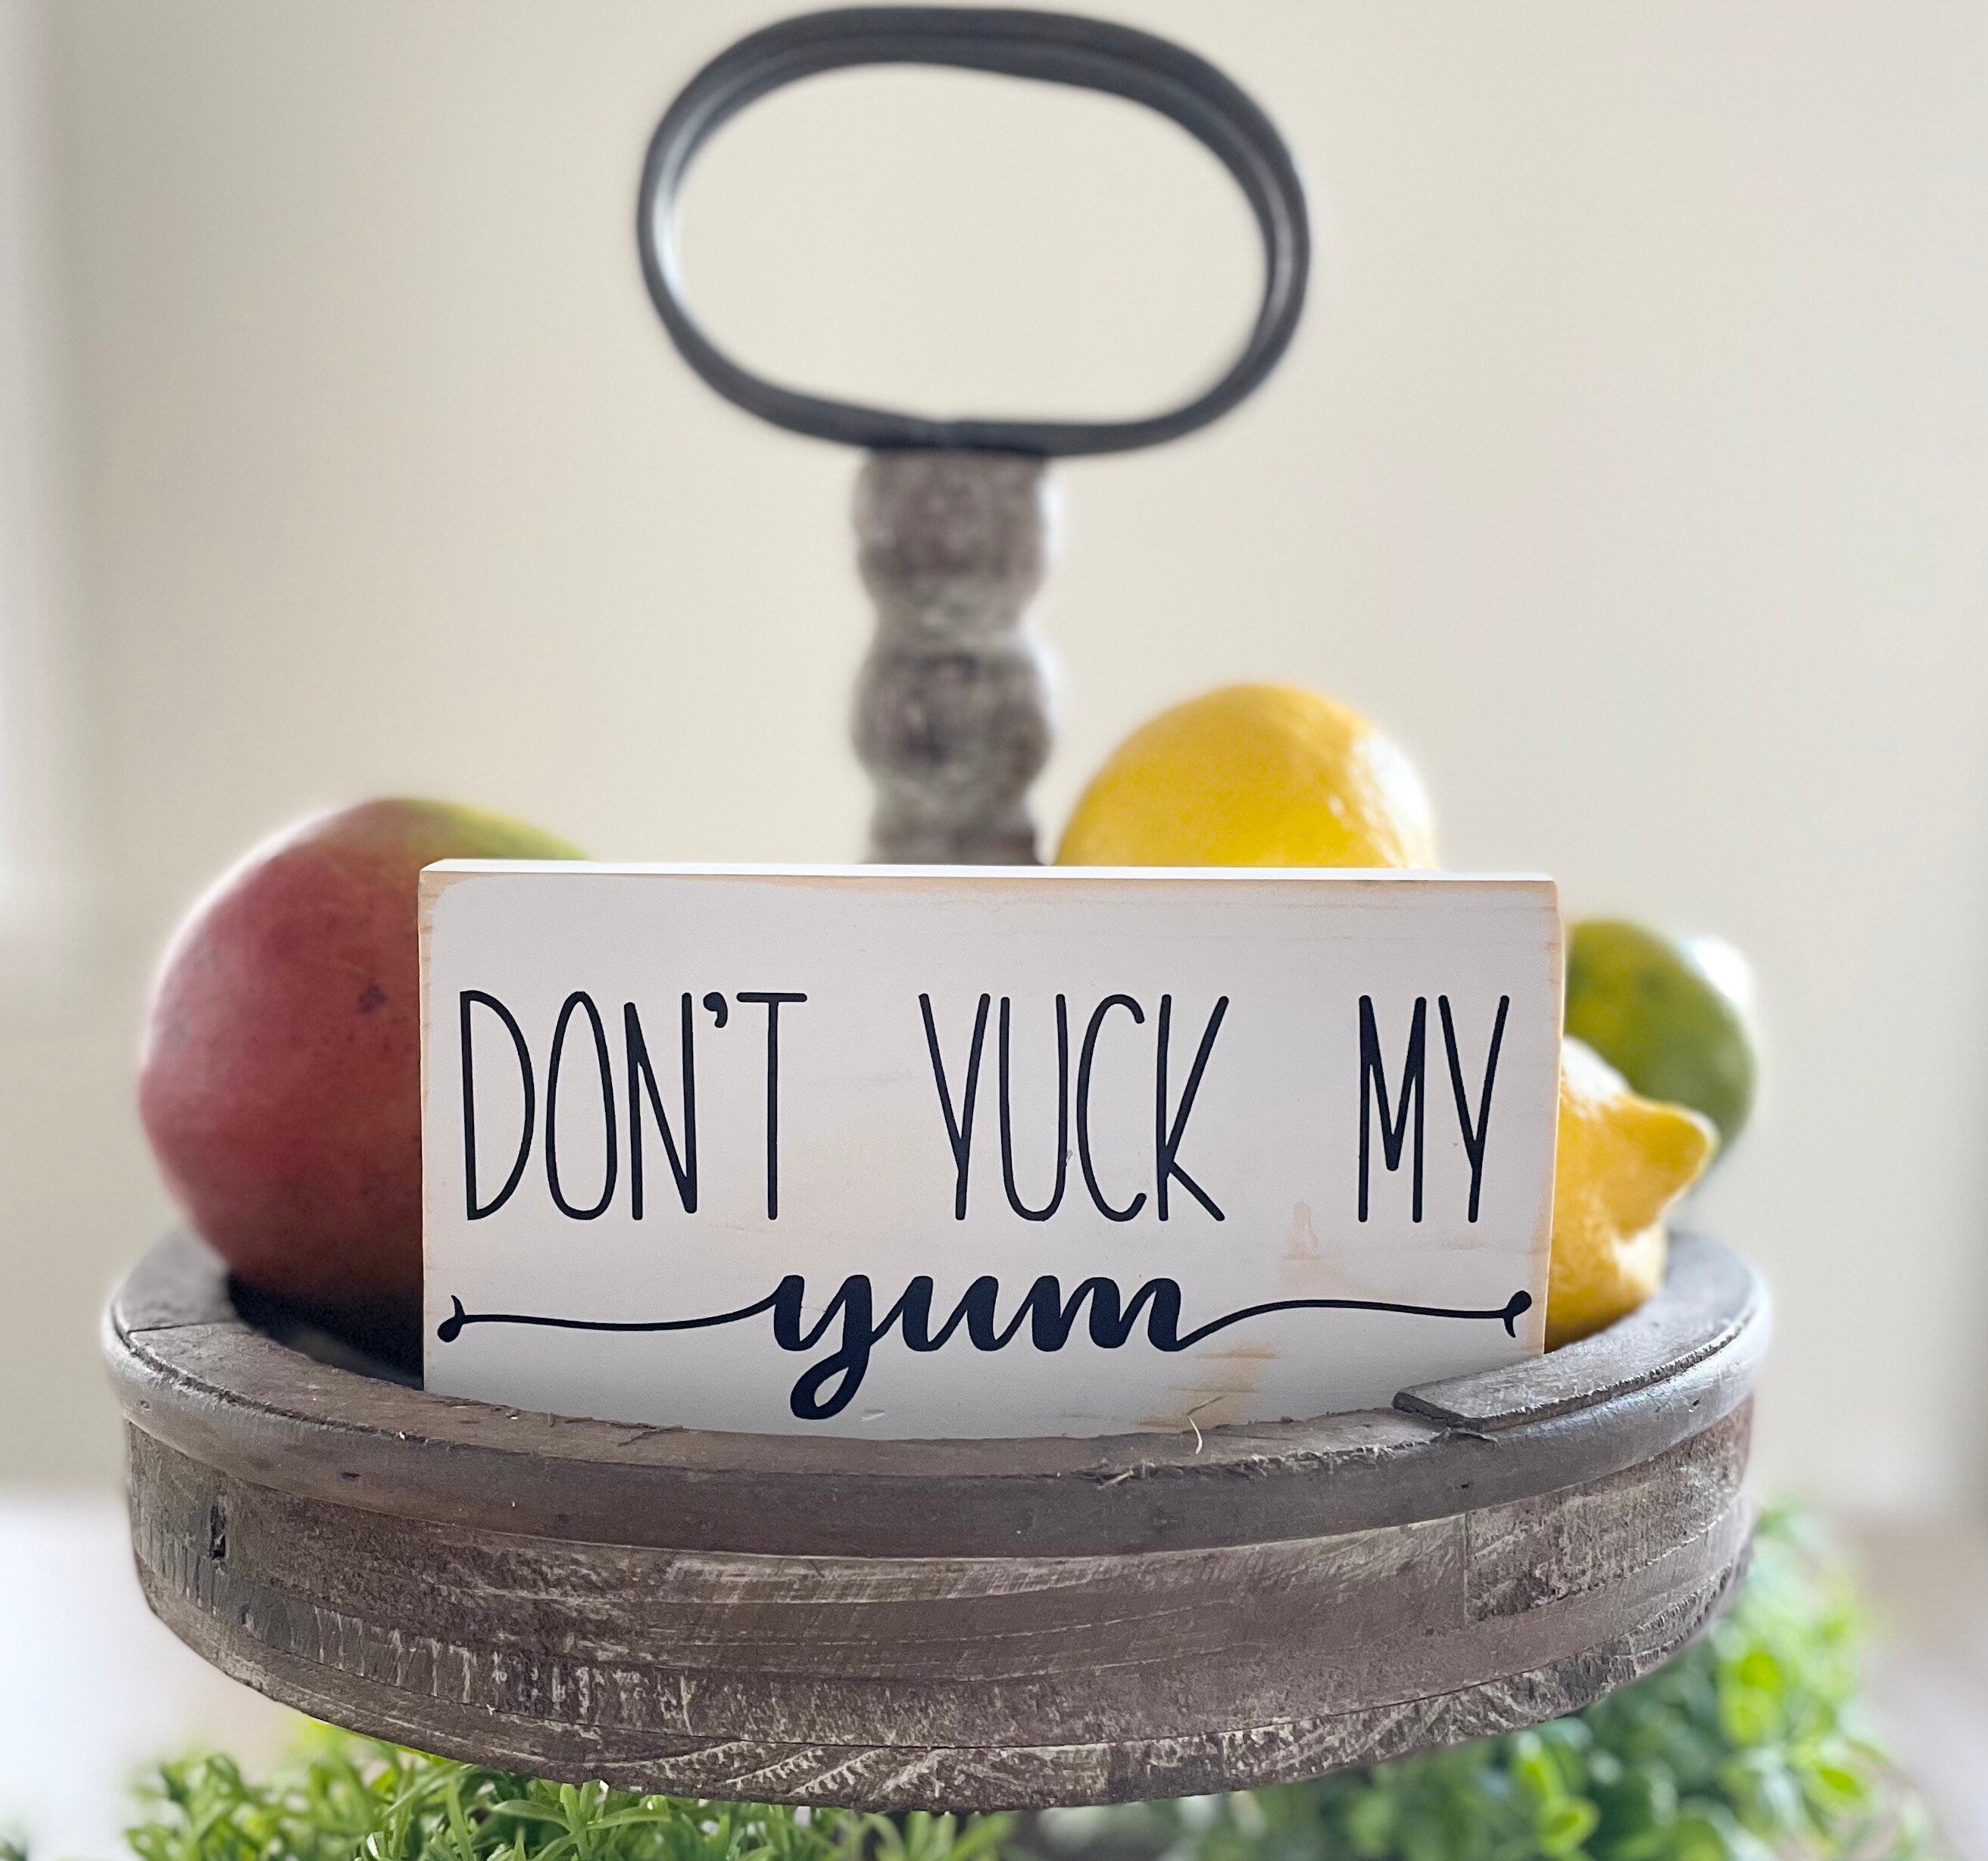 small wood rectangular sign painted white with black lettering that reads "Don't Yuck My Yum". Words are in all caps except for yum which is in a script font & is centered below the other words. The Y in yum has a "tail" that extends to the left, and the M in yum has a "tail" that extends to the right edge.